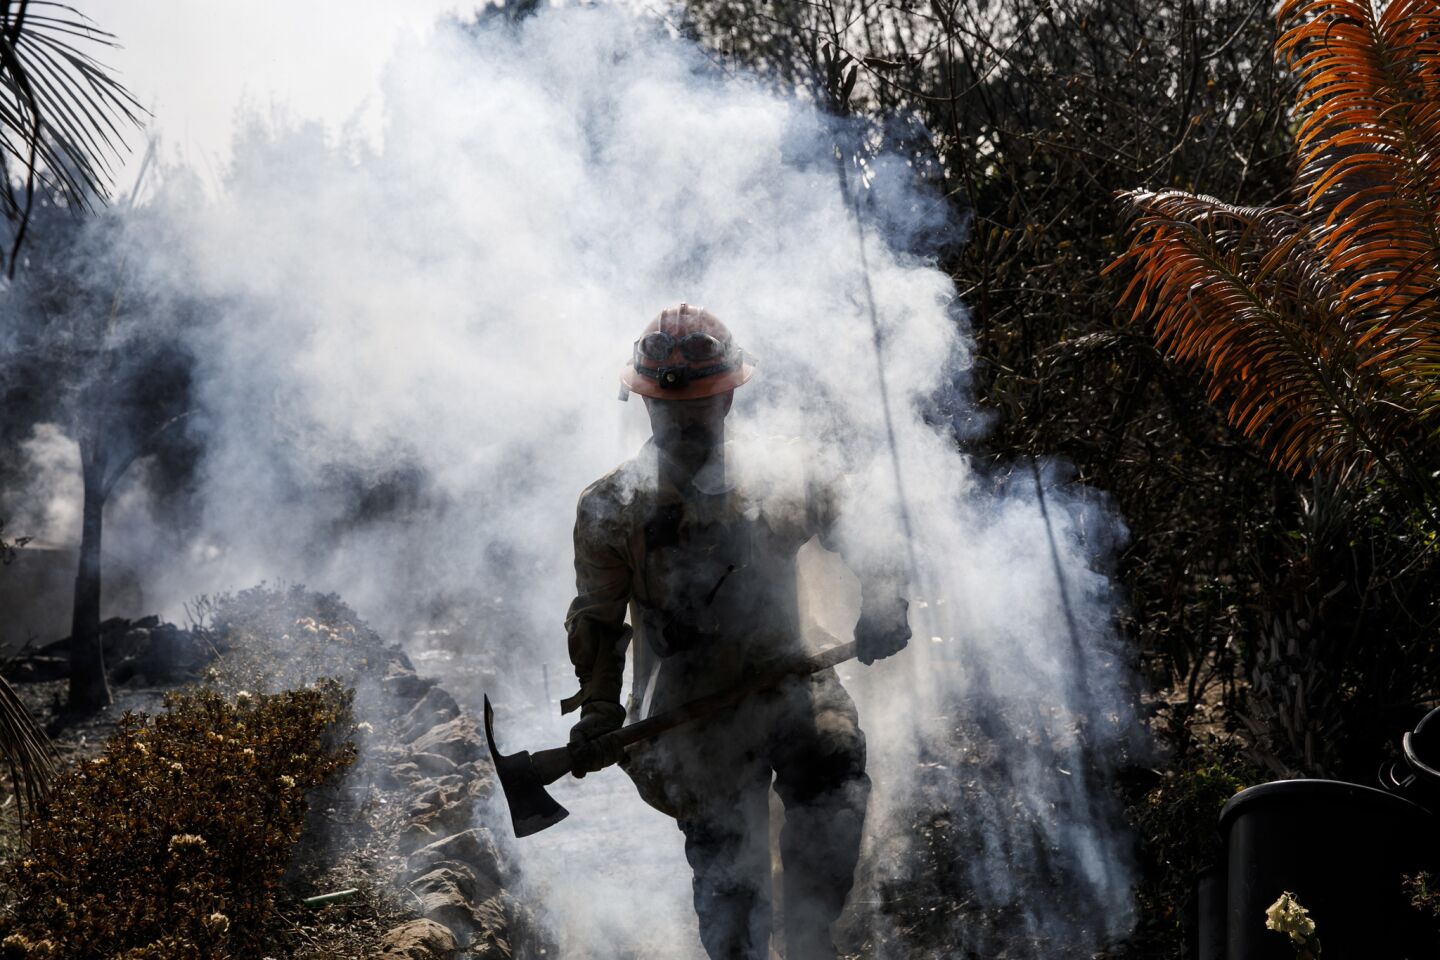 LA County firefighter Battalion 13 Captain Victor Correa helps put out hotspot in a neighborhood on Harvester road in Malibu.